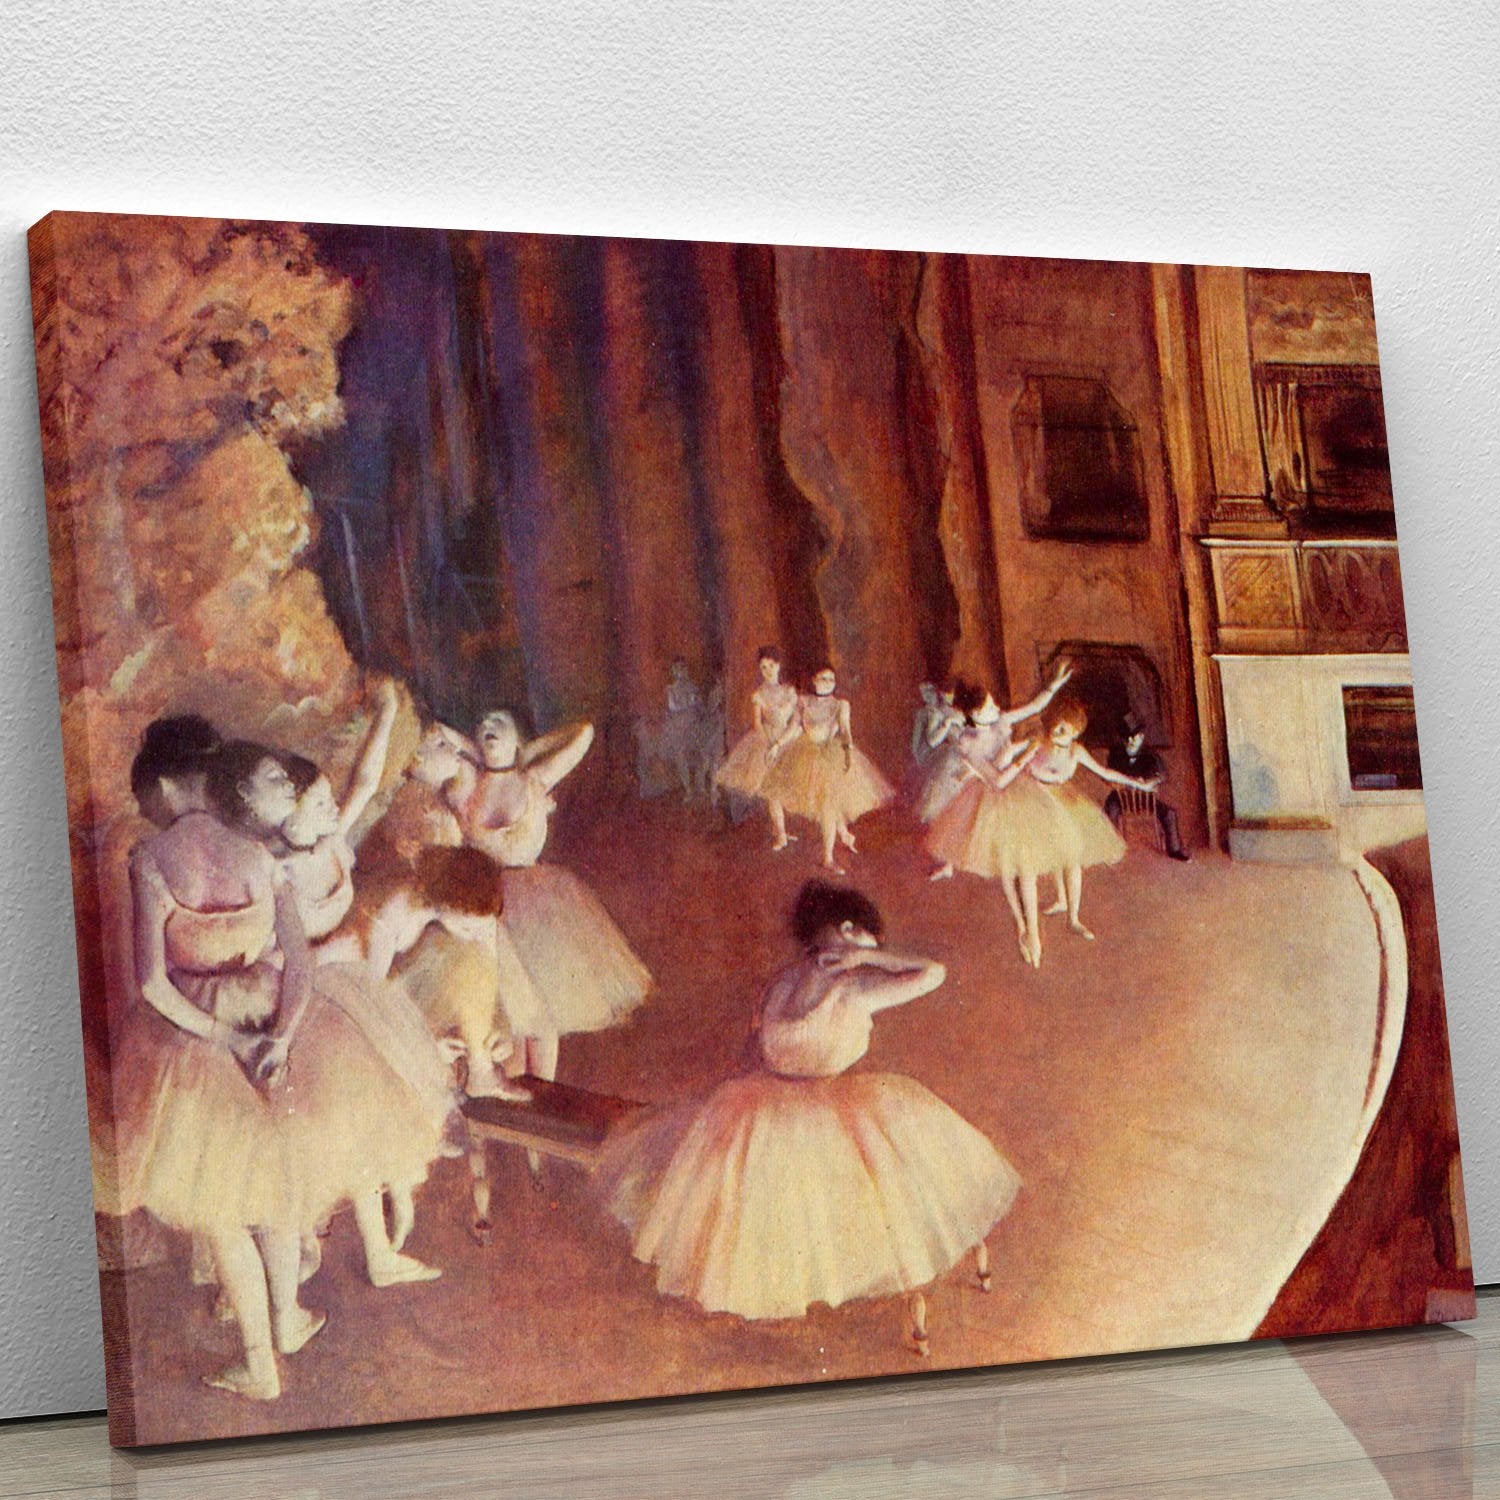 Dress rehearsal of the ballet on the stage by Degas Canvas Print or Poster